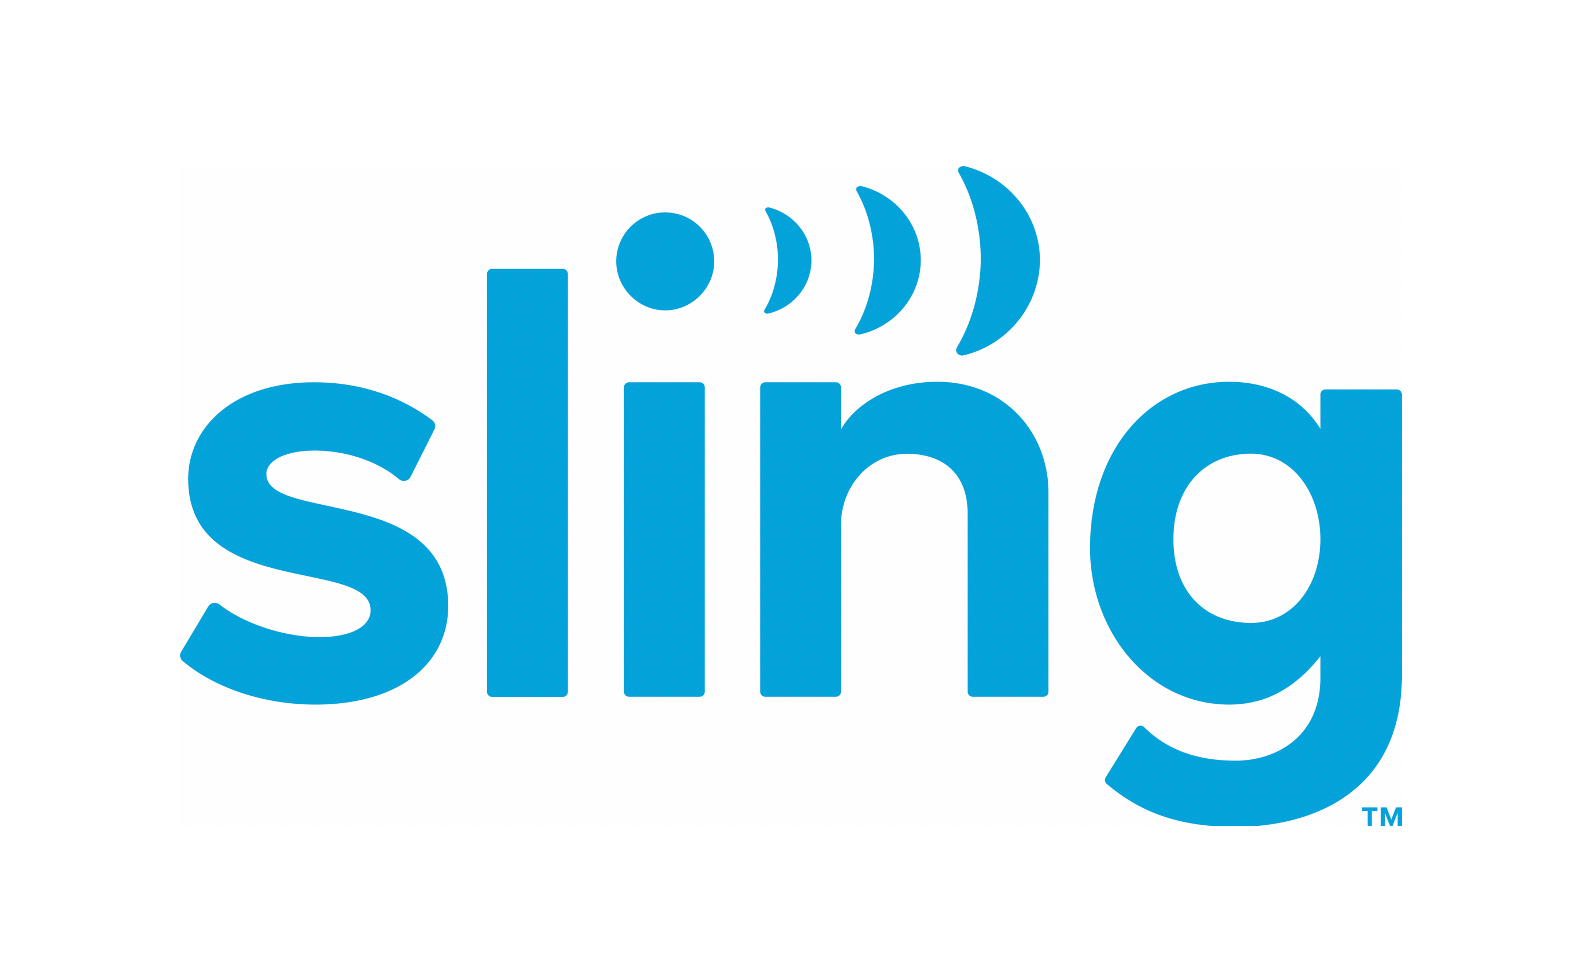 Sling TV is Offering A Freeview of NBA TV Through the First Round of the NBA Playoffs